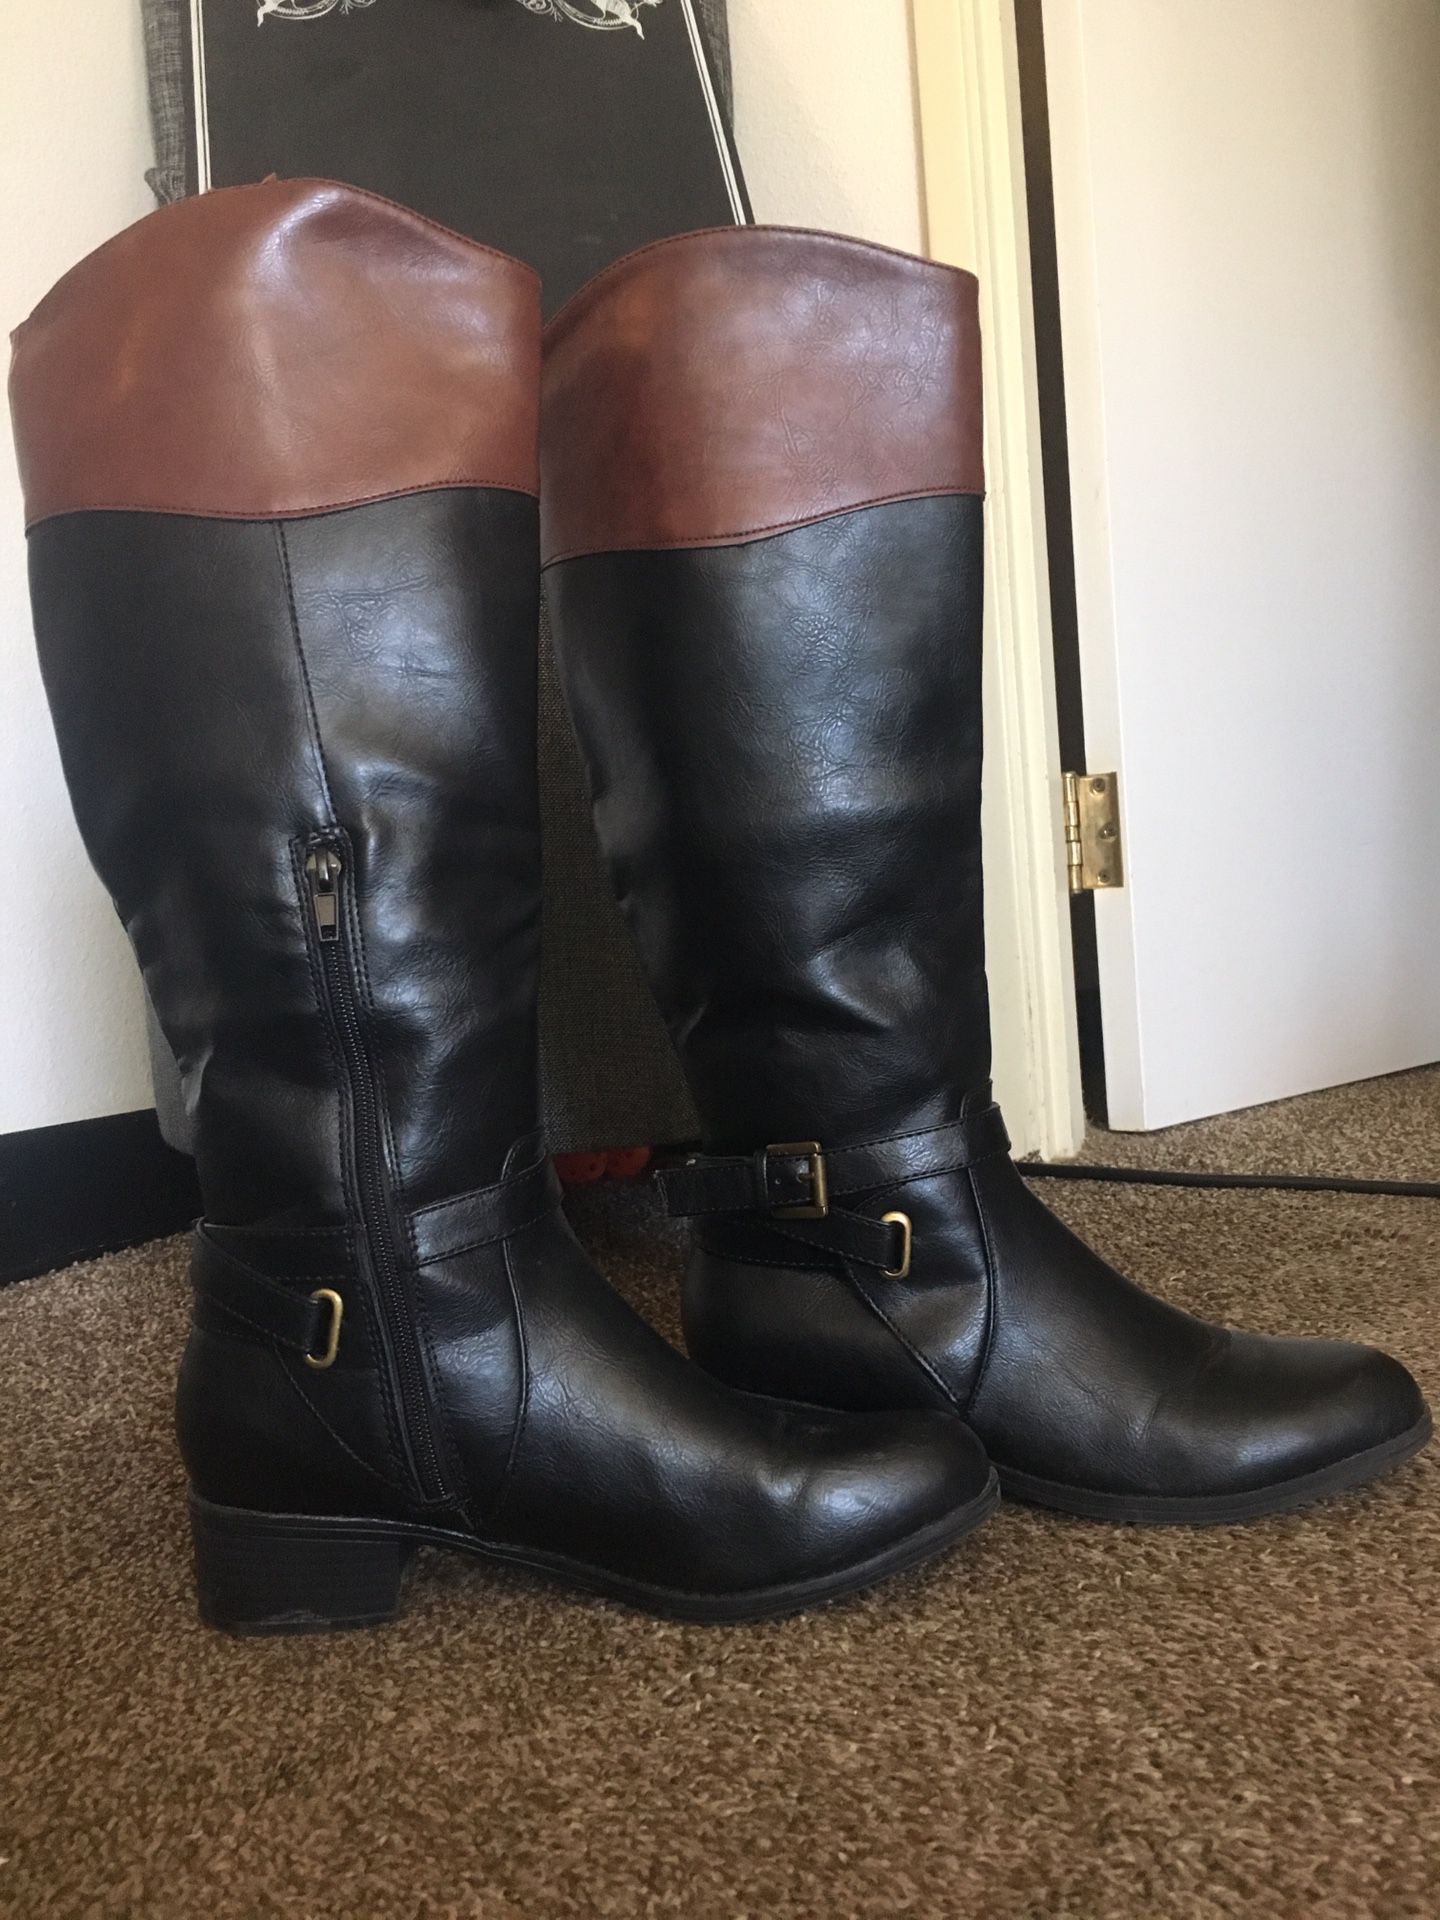 Women’s size 7.5 boots~ $15 for black $10 for brown